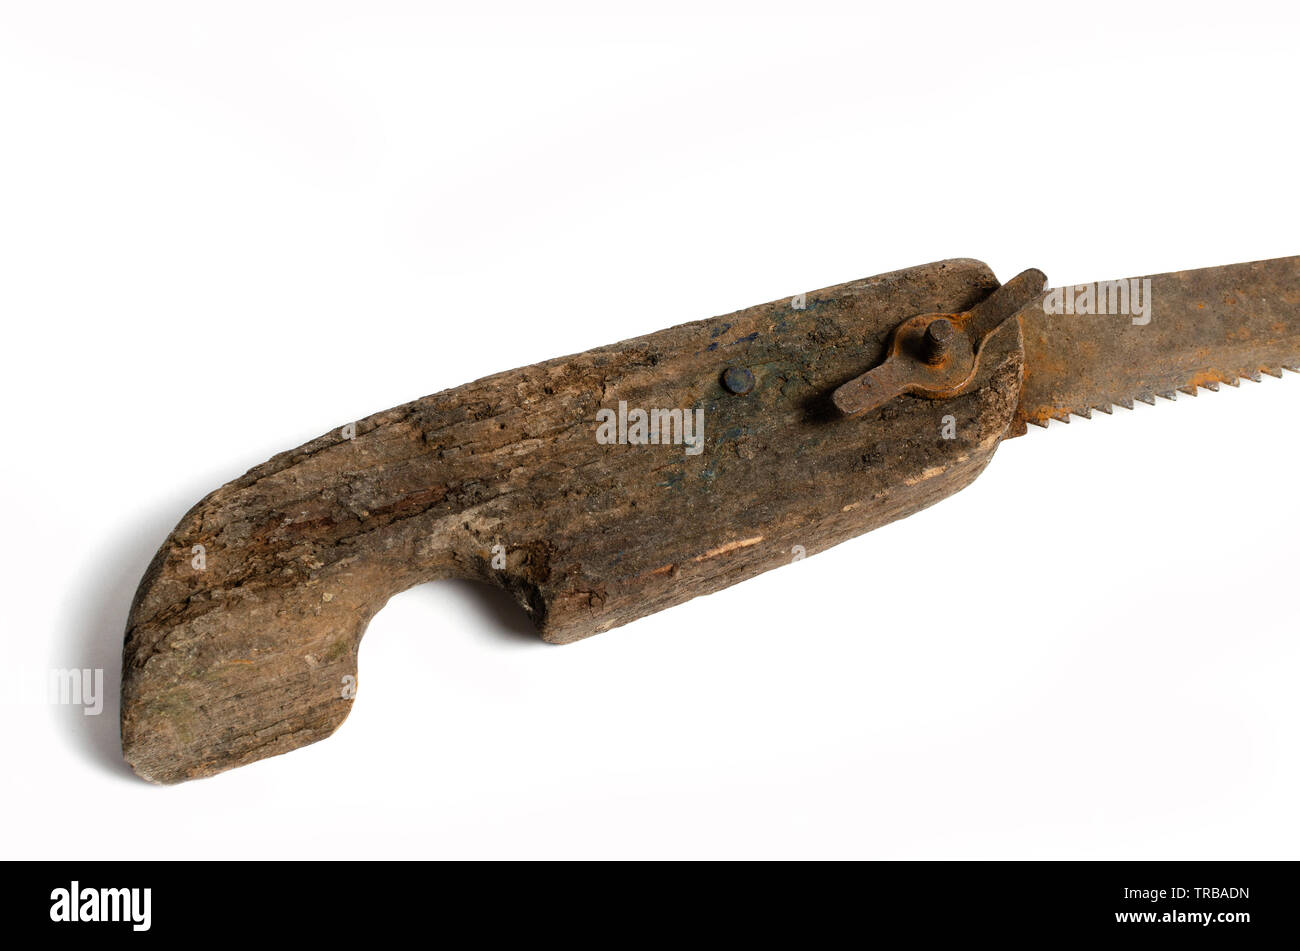 https://c8.alamy.com/comp/TRBADN/old-rusty-hacksaw-with-wooden-handle-on-white-background-isolate-TRBADN.jpg